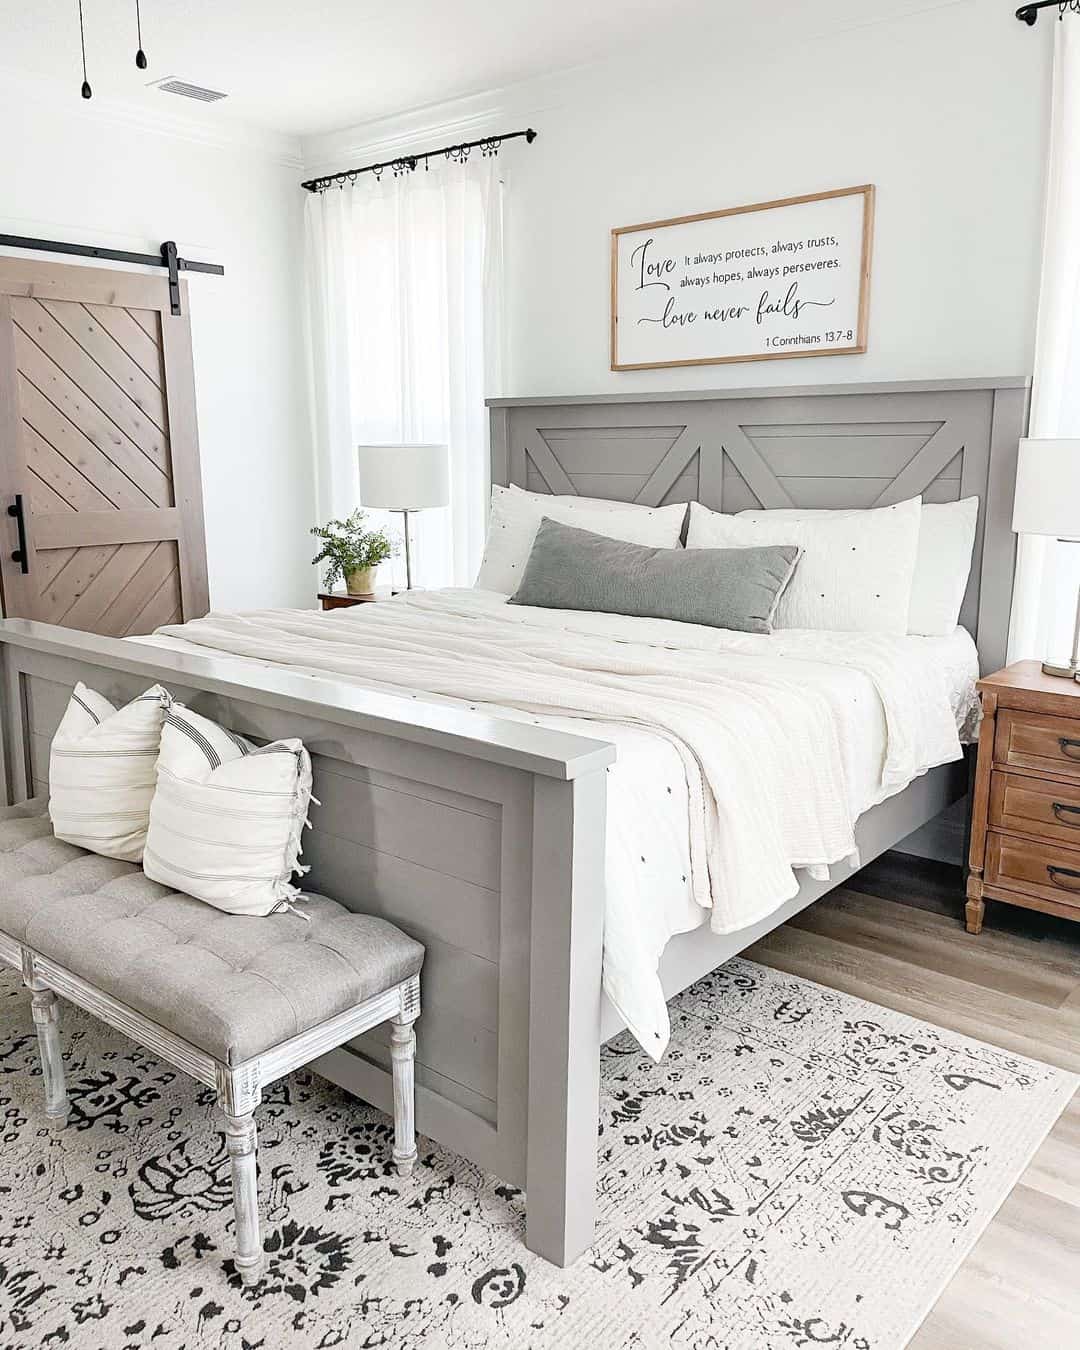 Subtle Gray-Painted Wood Bed, White Bedding Harmony